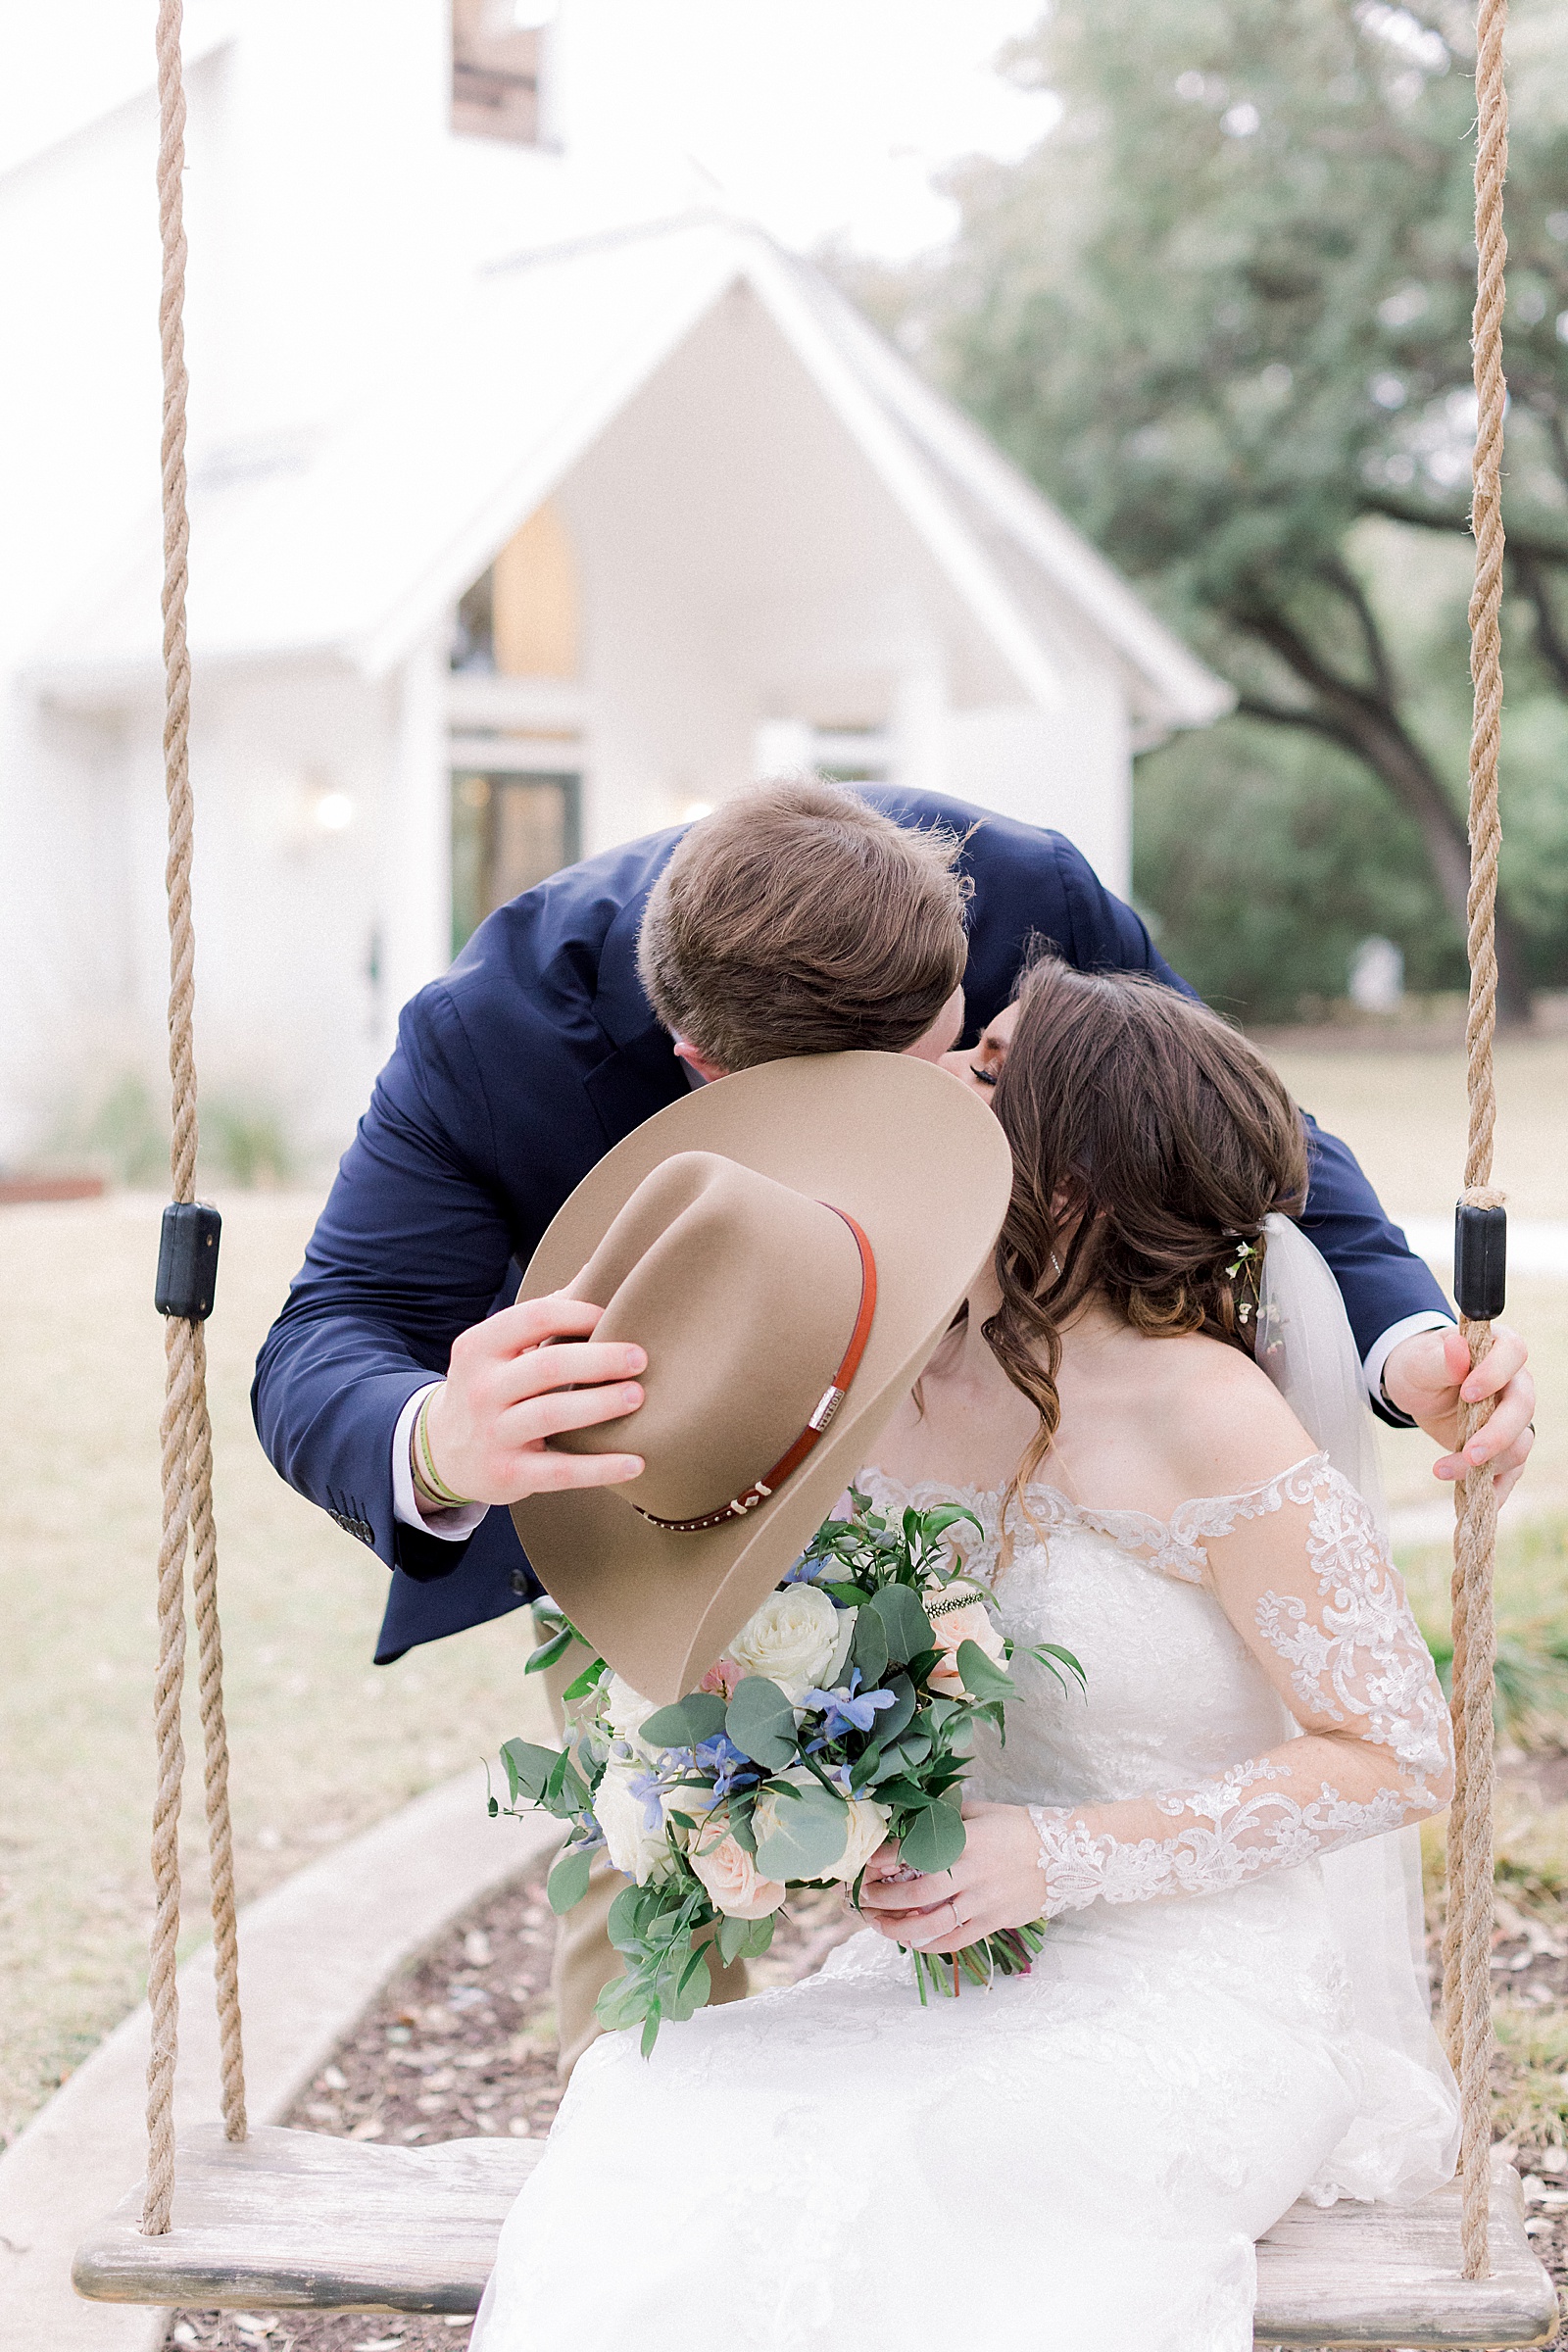 Couples Picture on a swing, Texas Wedding Photography